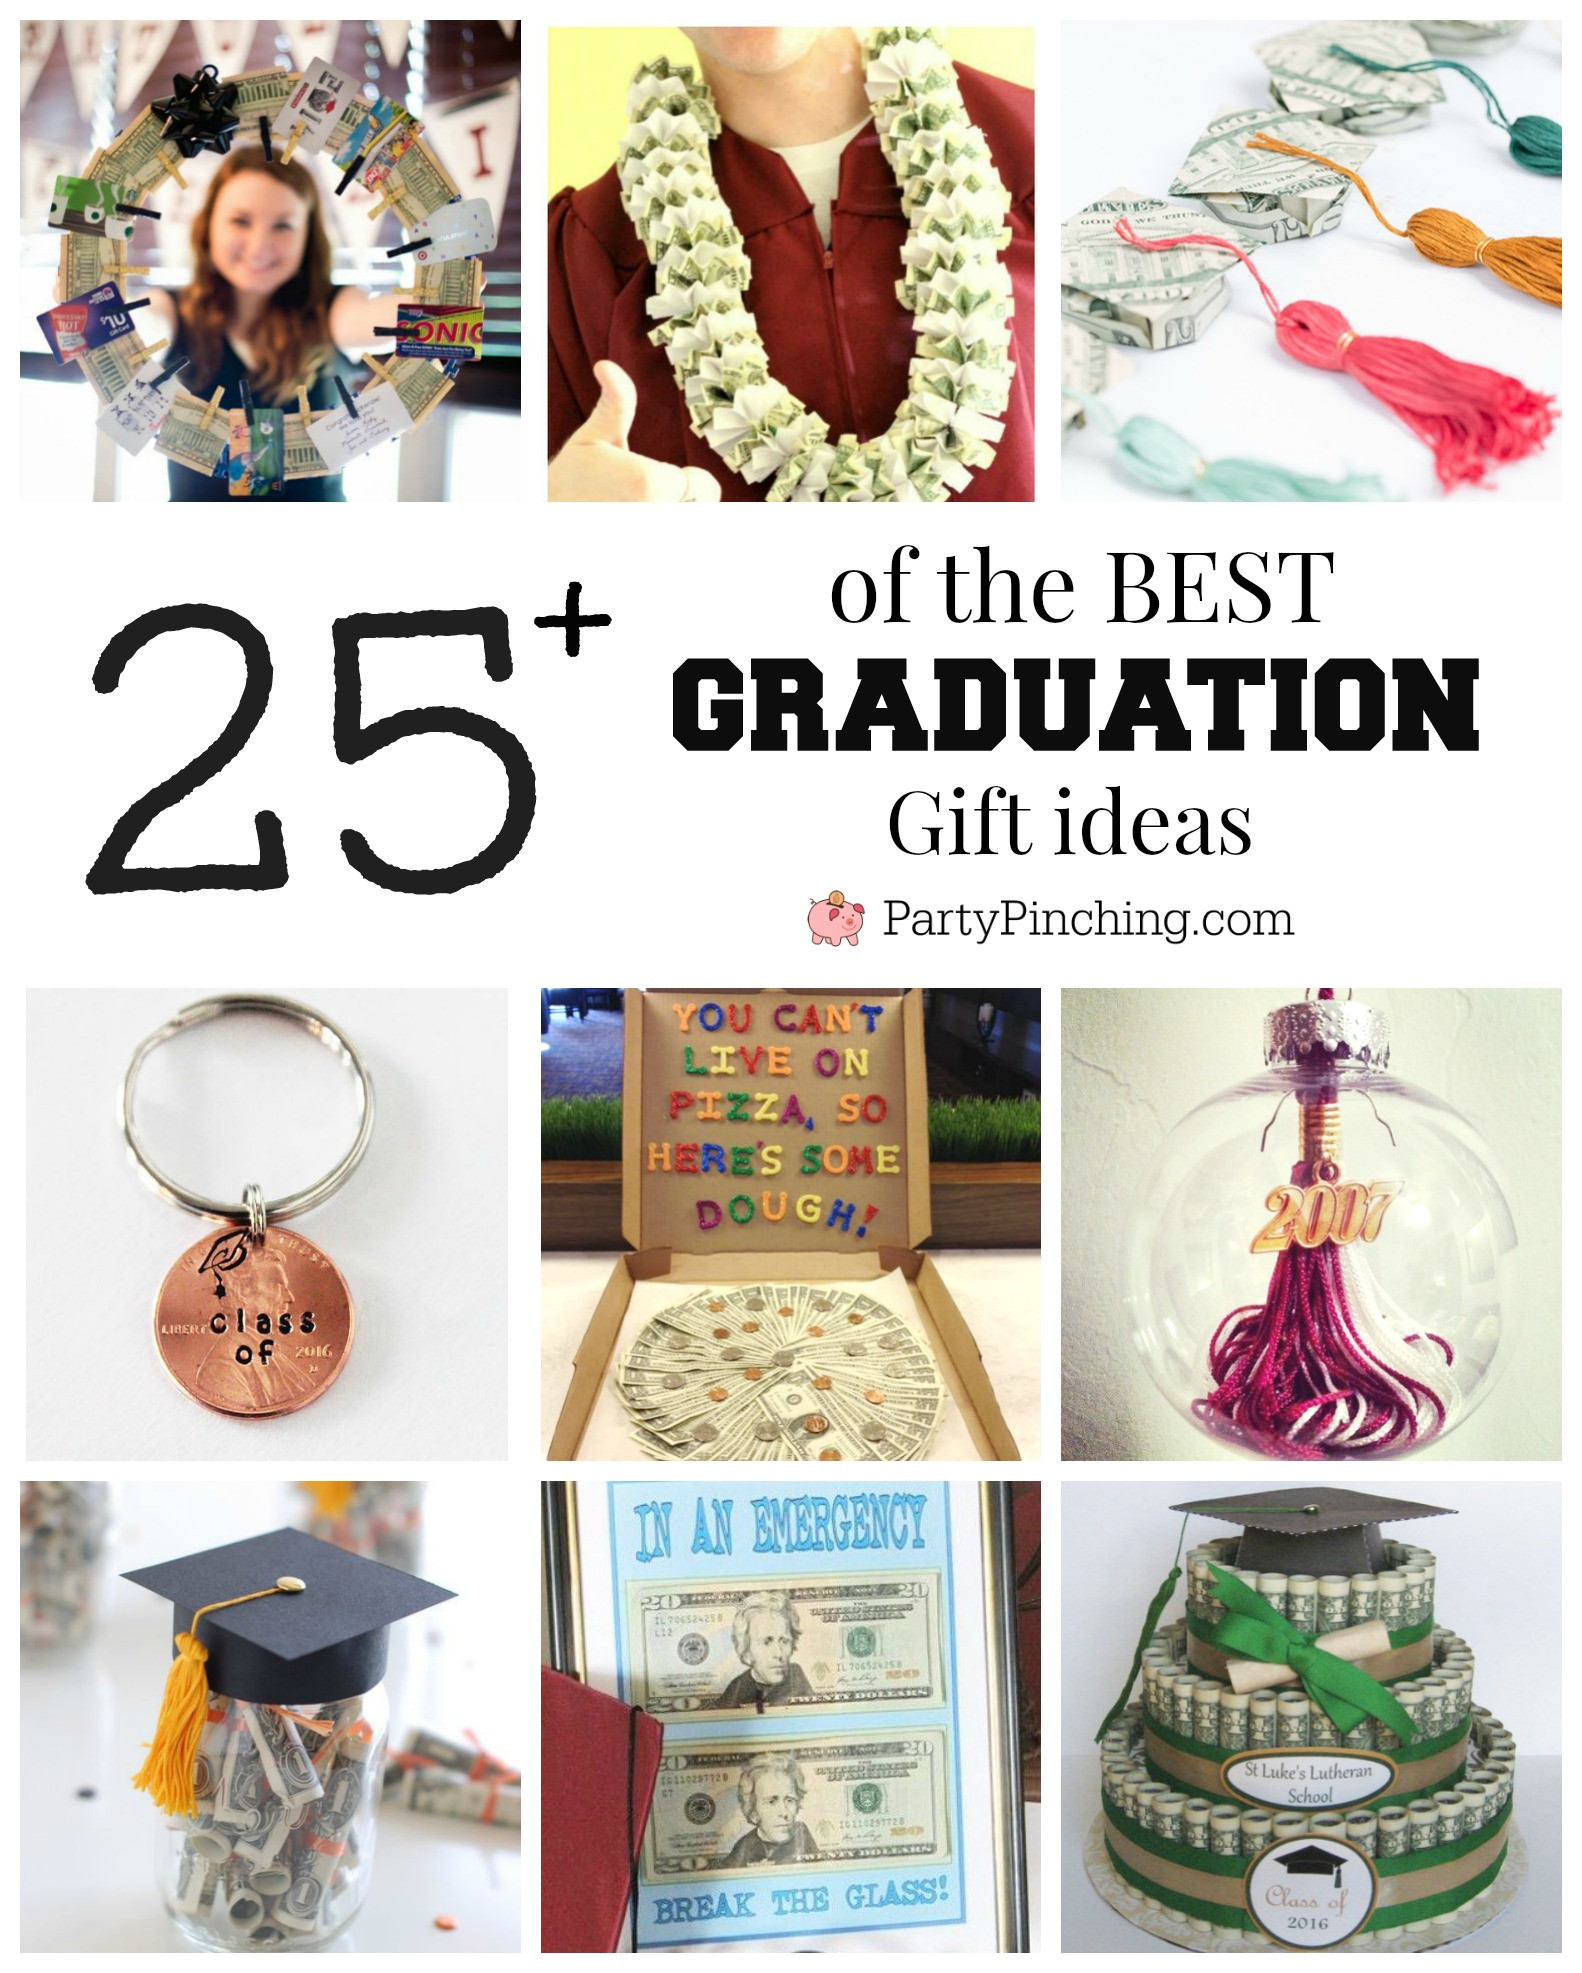 Gift Ideas For Graduation Party
 Best DIY Graduation Gifts 2020 Graduation Party Ideas 2020